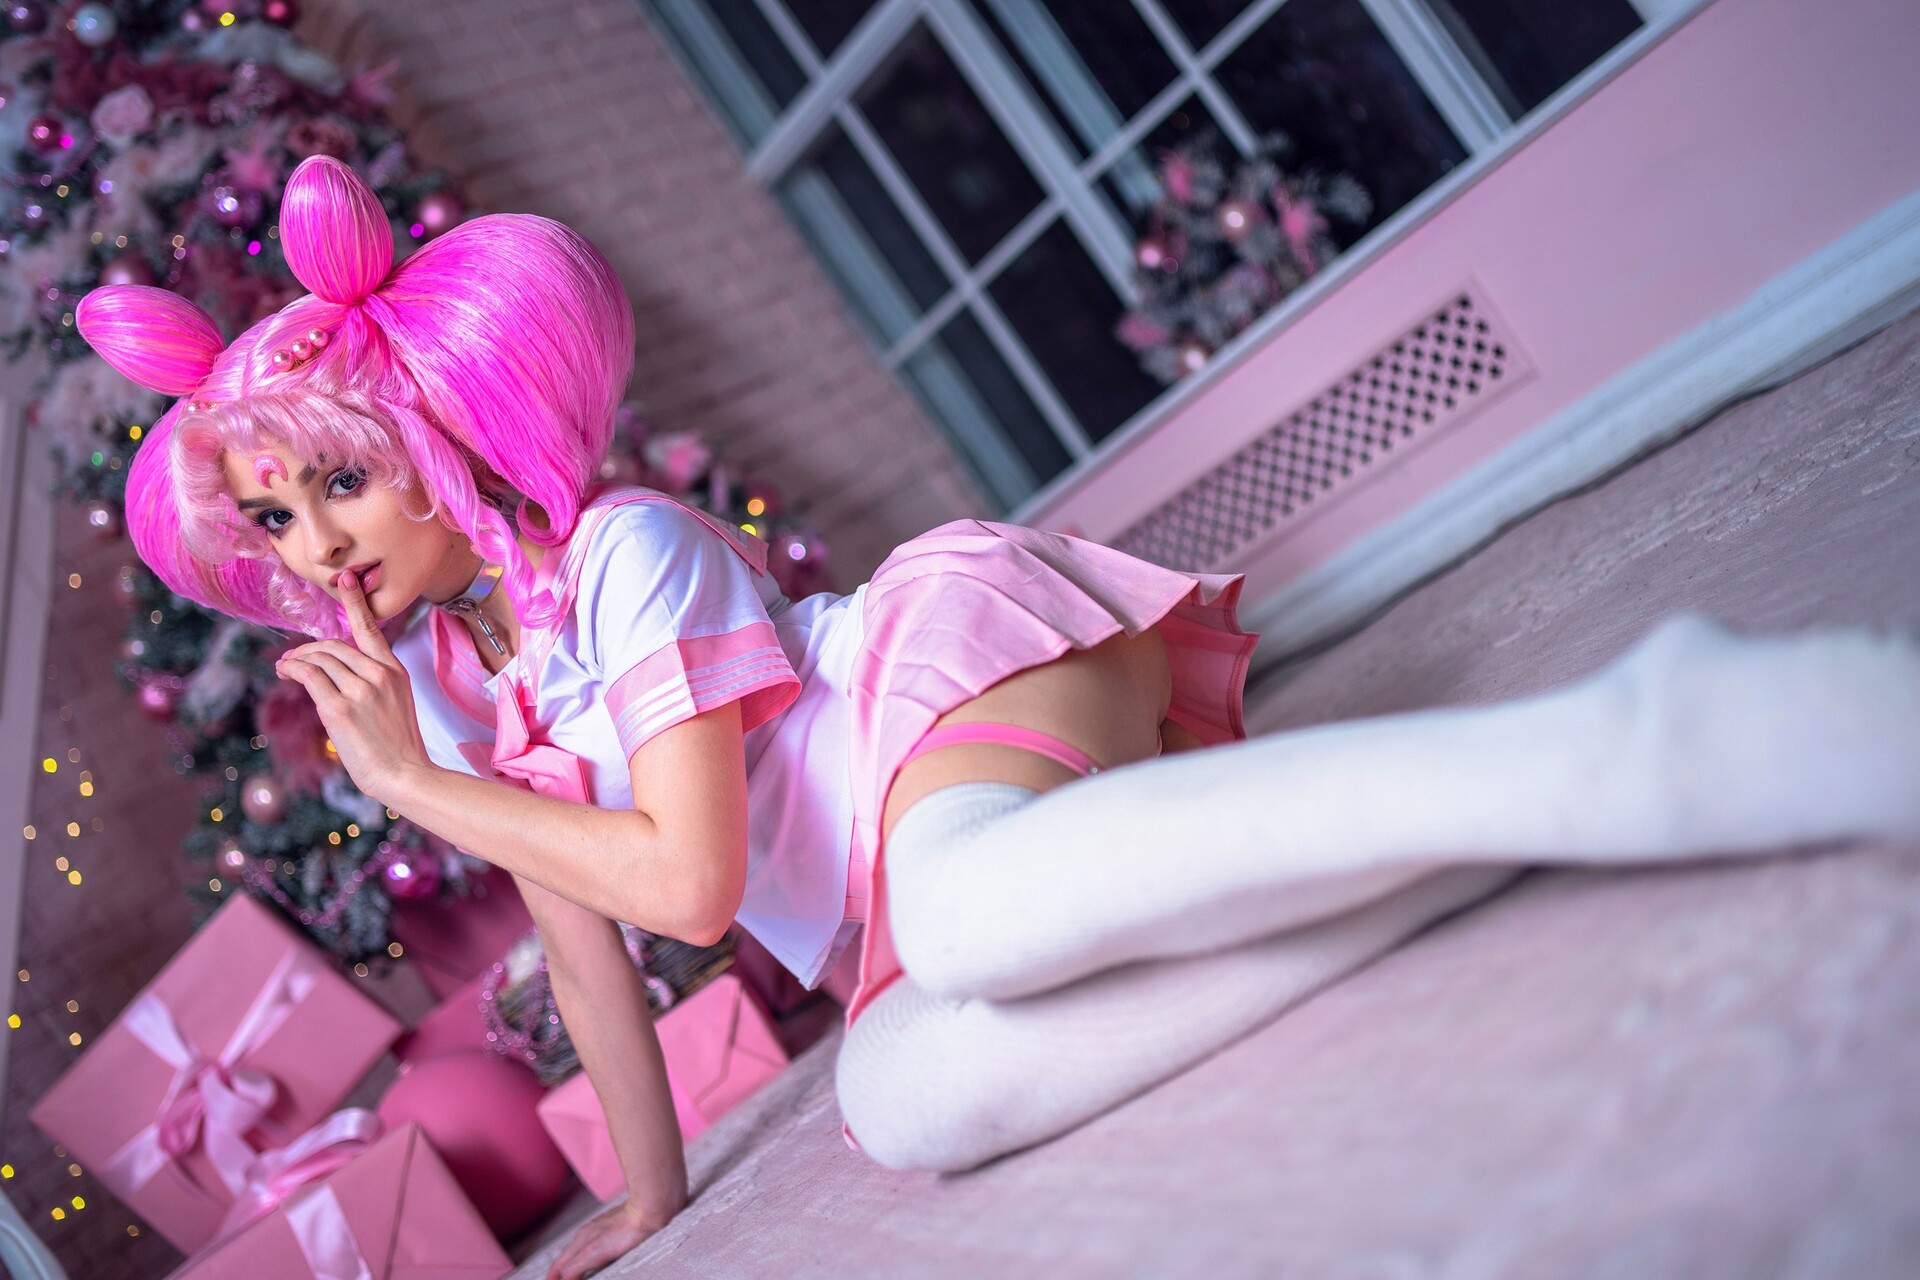 4 more photos of my Chibiusa cosplay from Sailor moon.